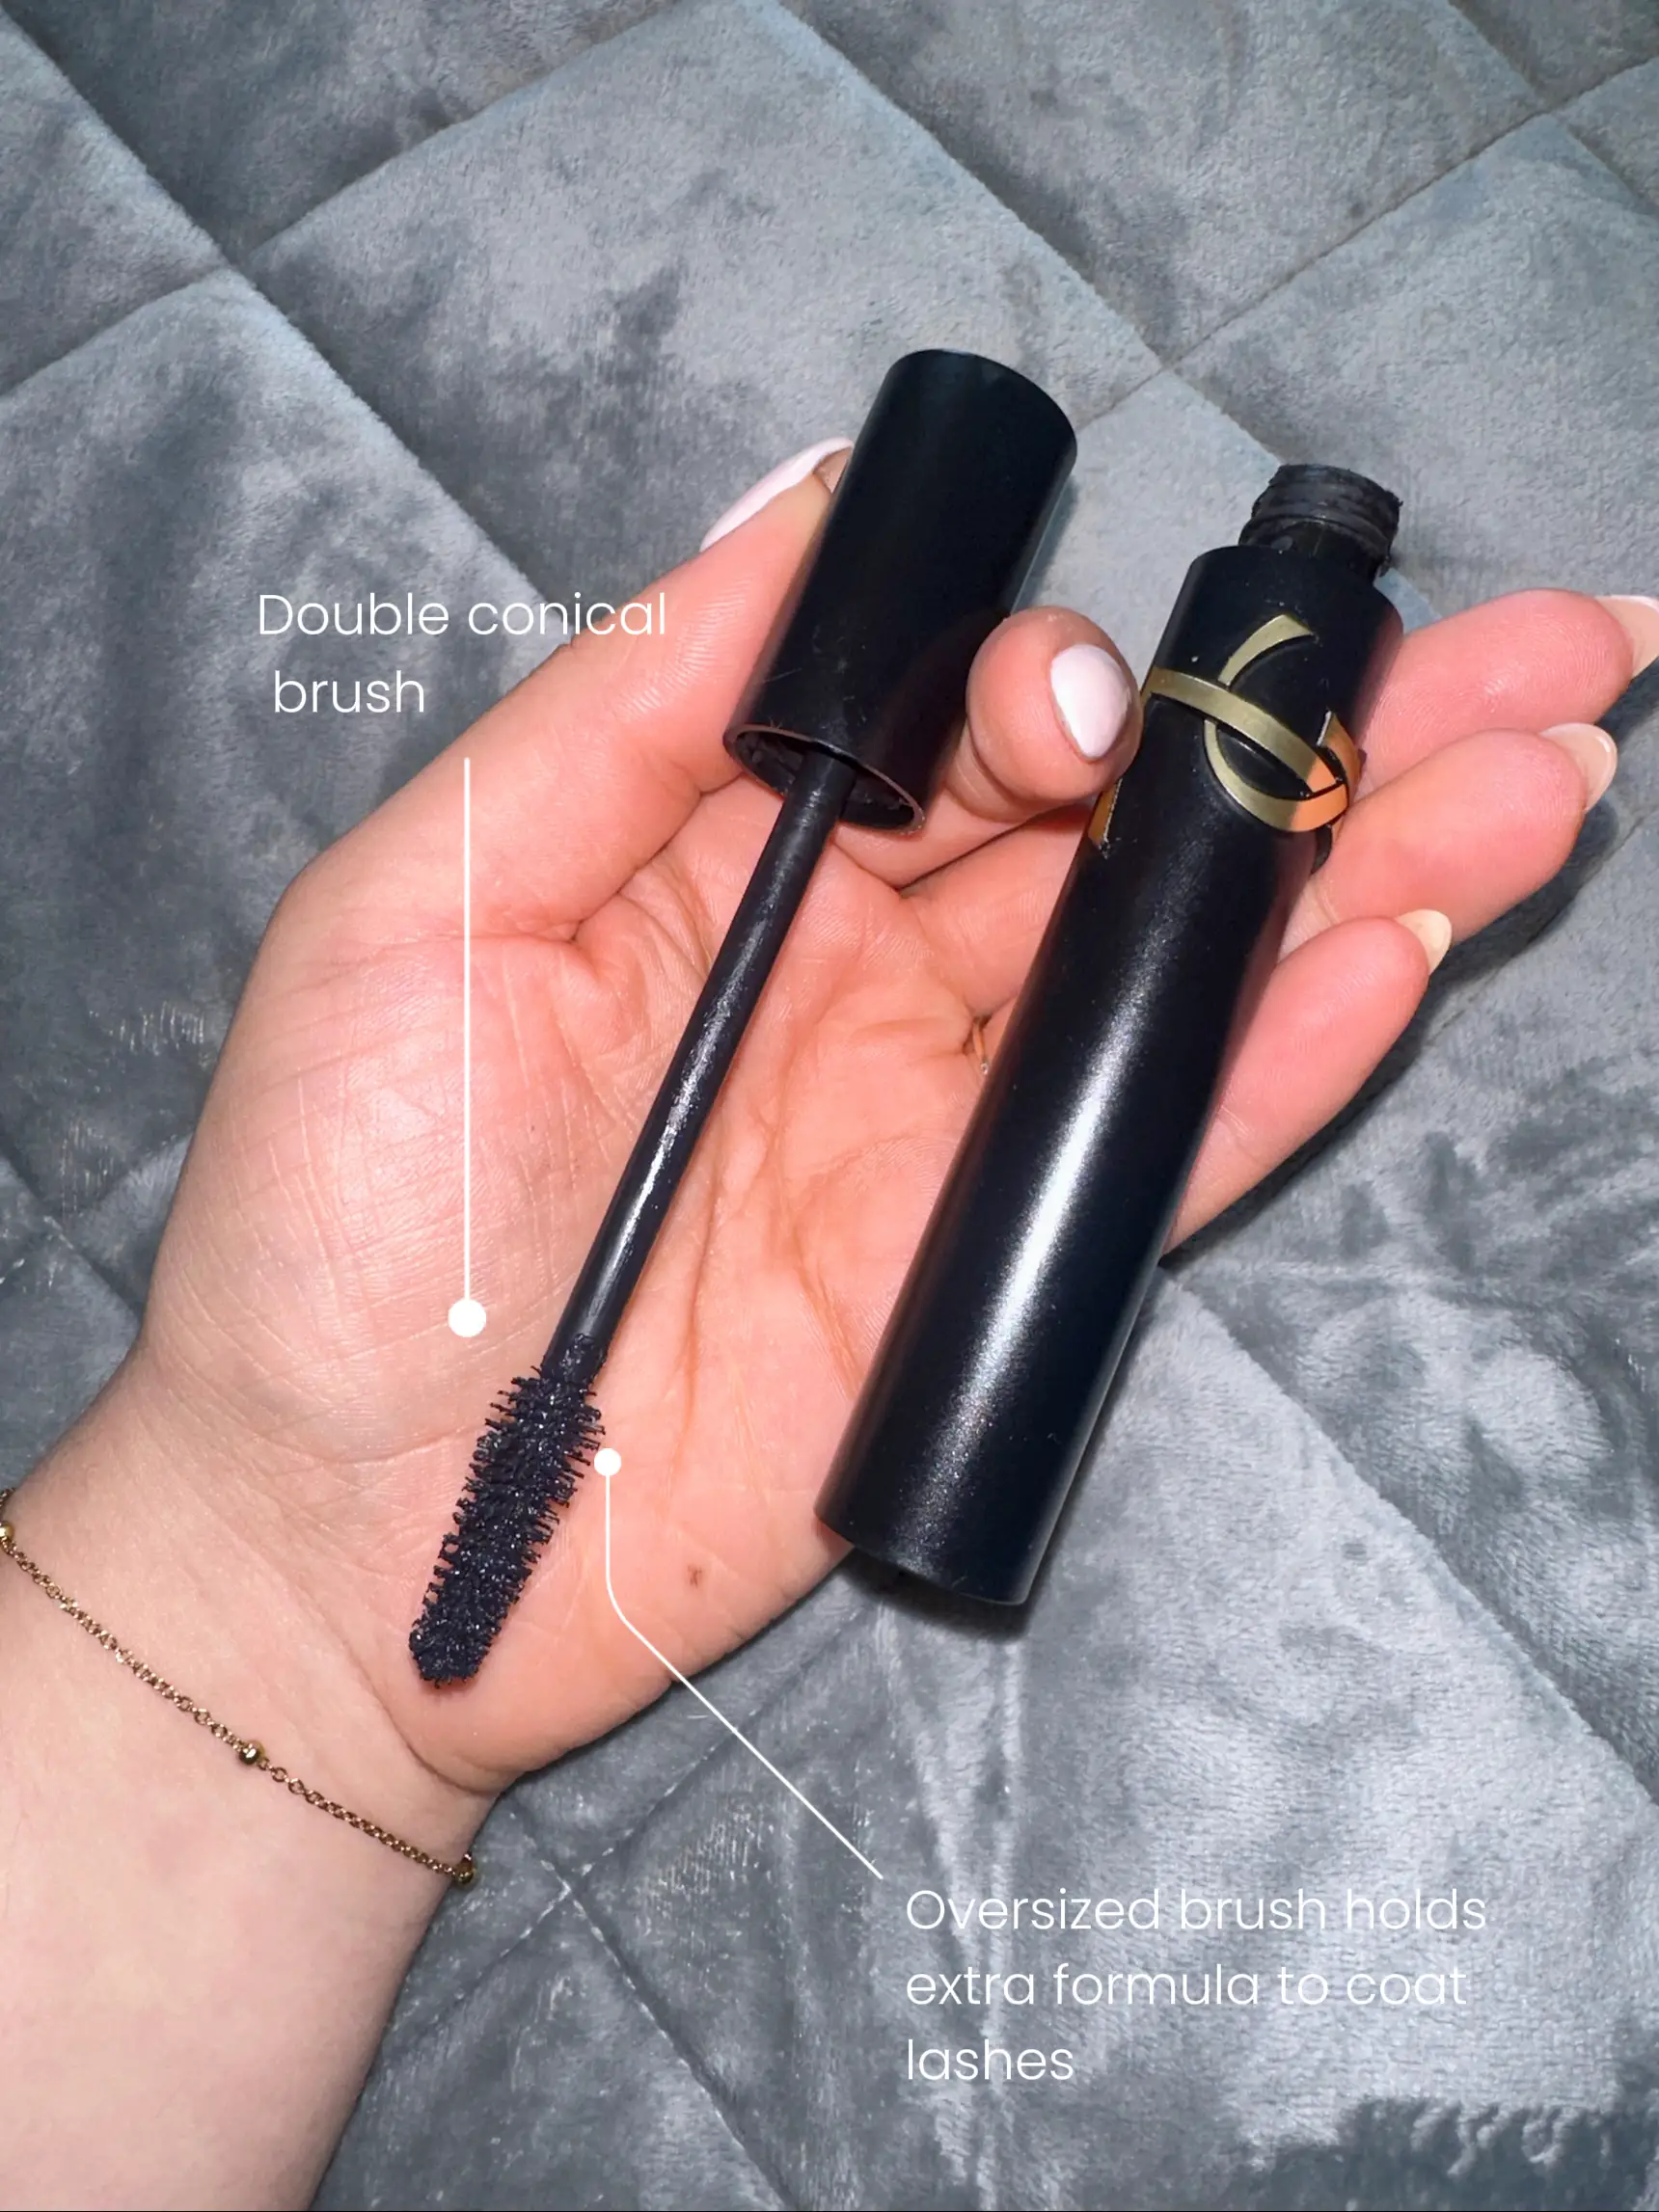 Luxury Product Review: Is YSL Mascara Worth It?, Video published by  littleyellowkoi